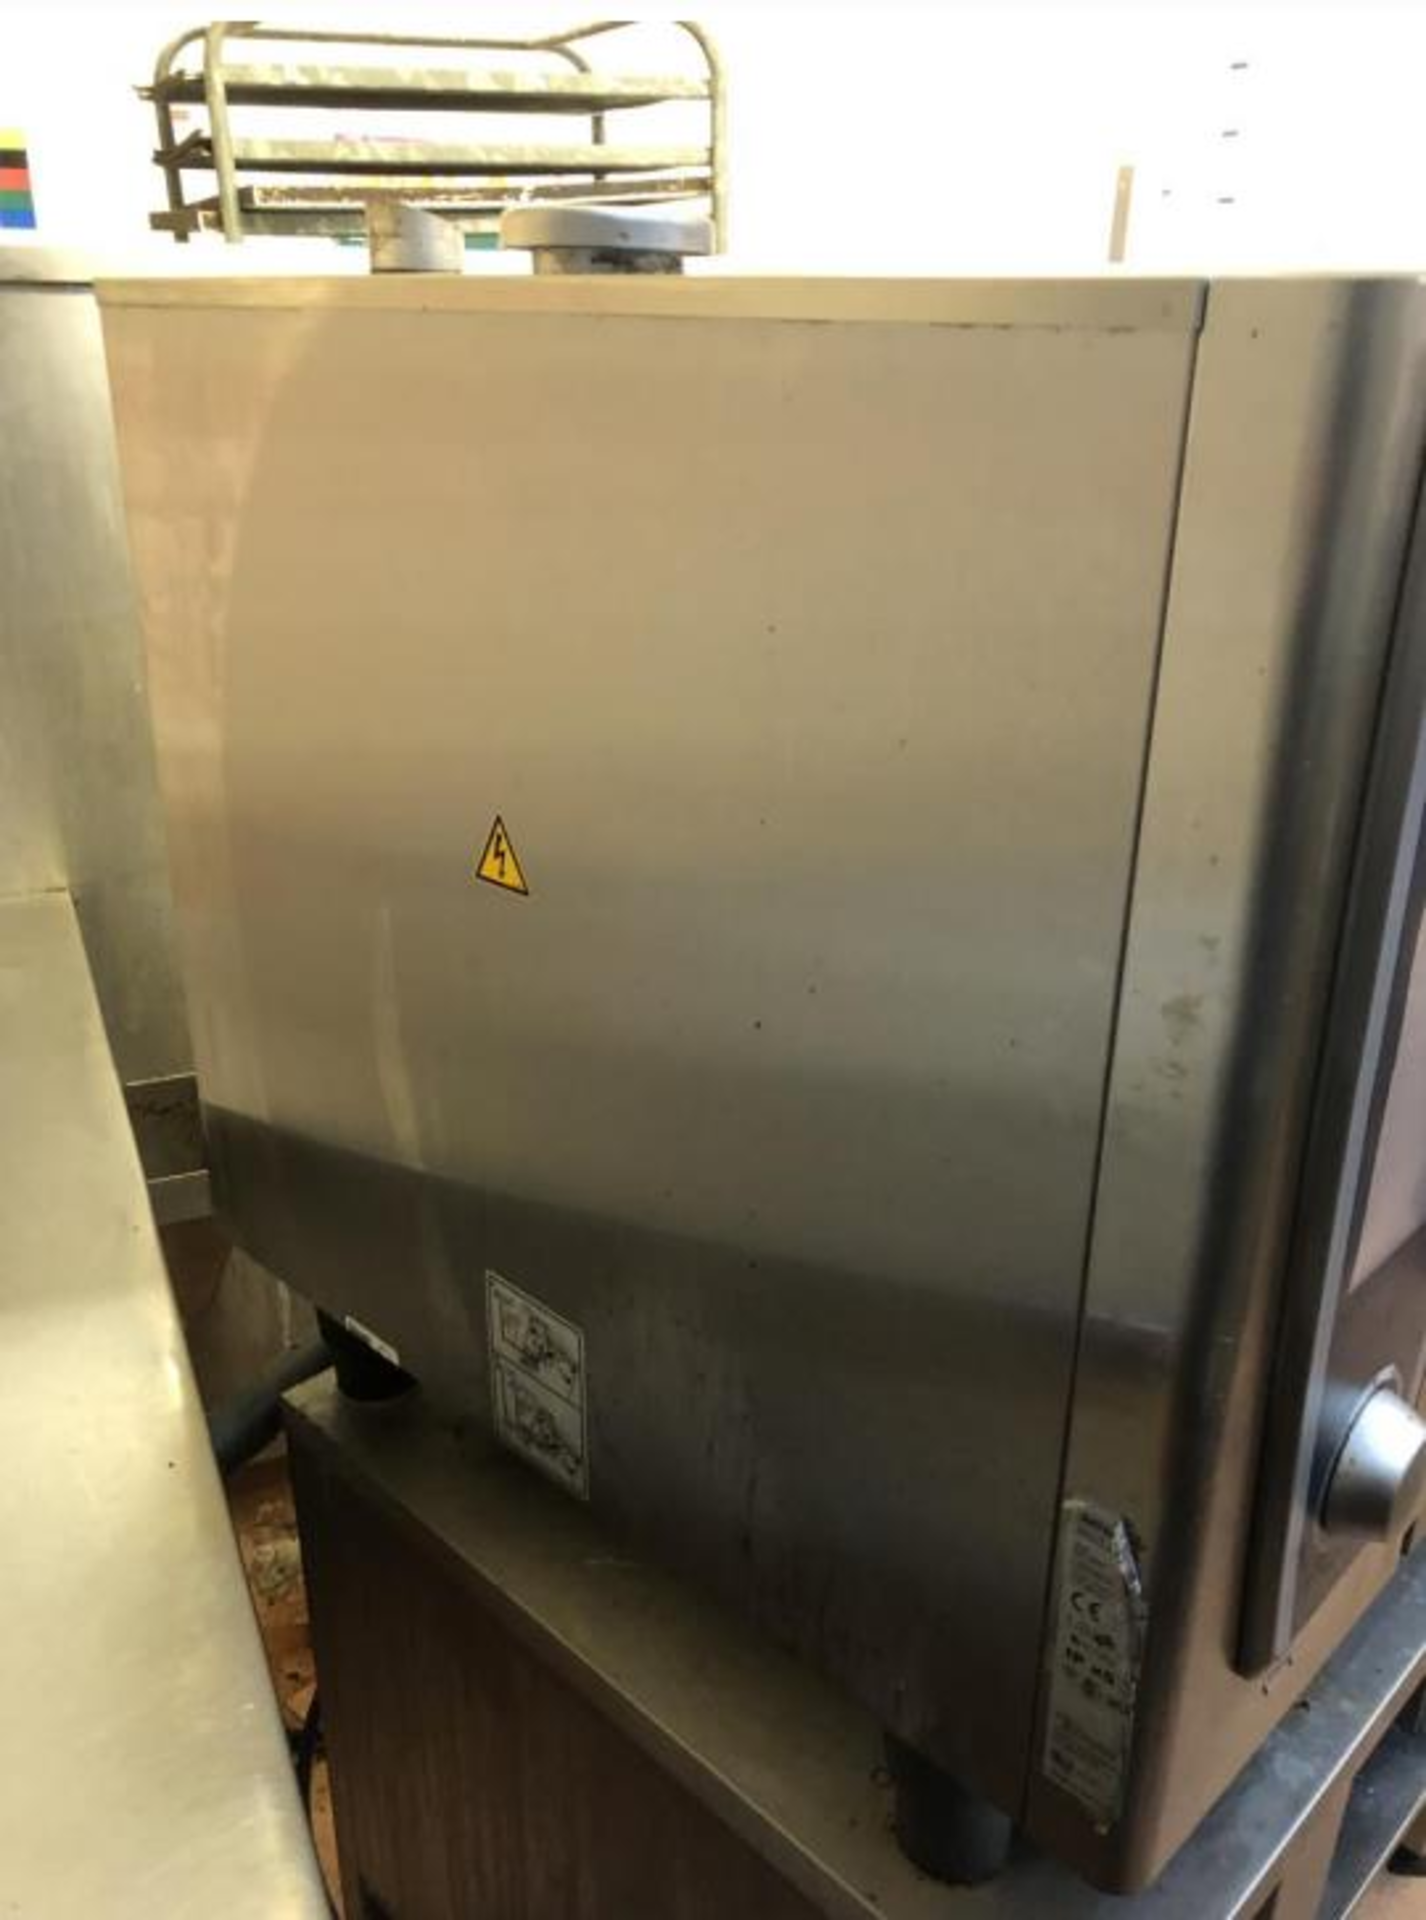 RATIONAL SCC COMBI OVEN - Image 3 of 4